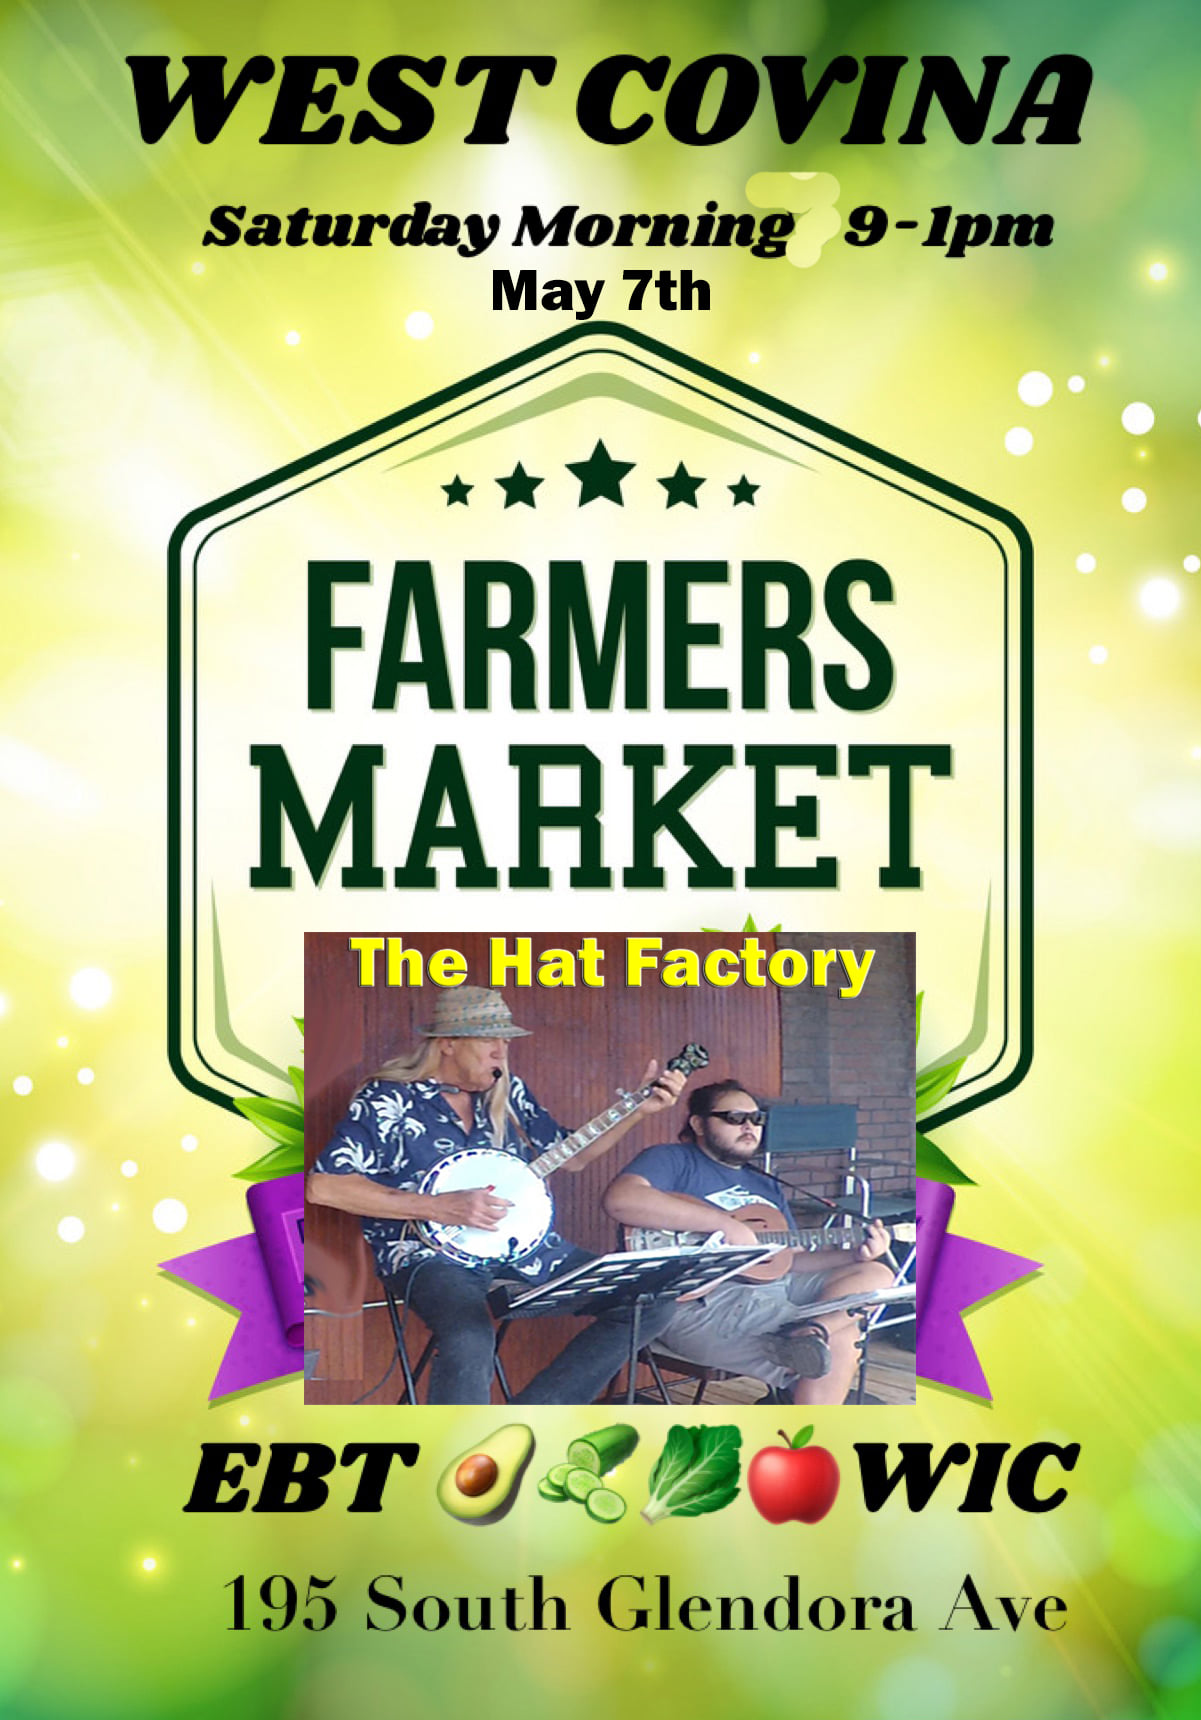 Green flyer for West Covina Farmers Market showing band